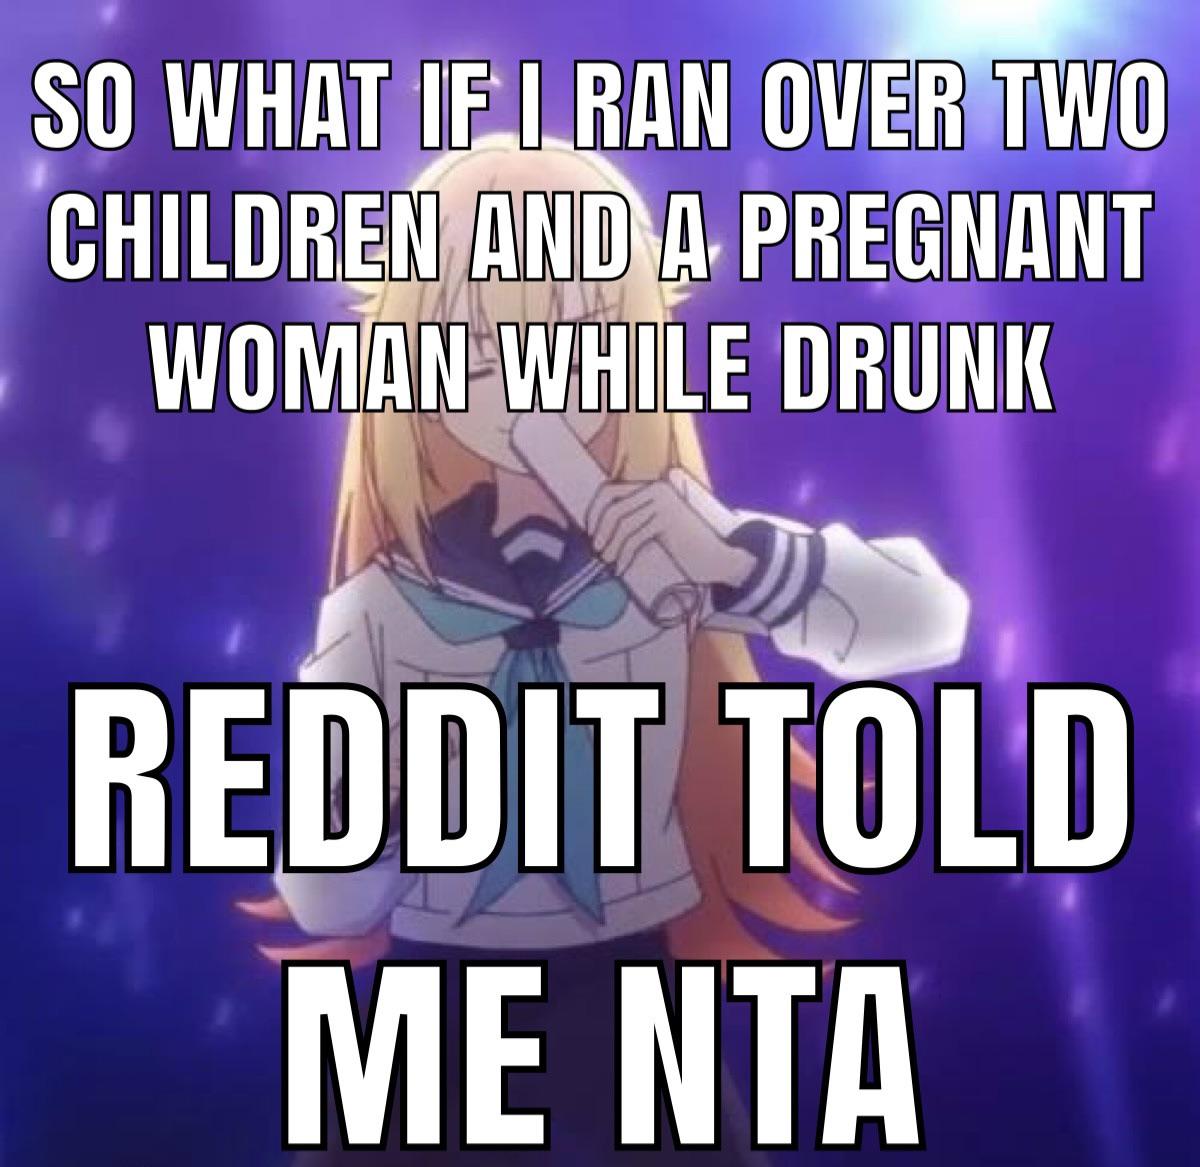 SO WHAT IF I RAN OVER TWO CHILDREN AND A PREGNANT WOMAN WHILE DRUNK REDDIT TOLD ME NTA